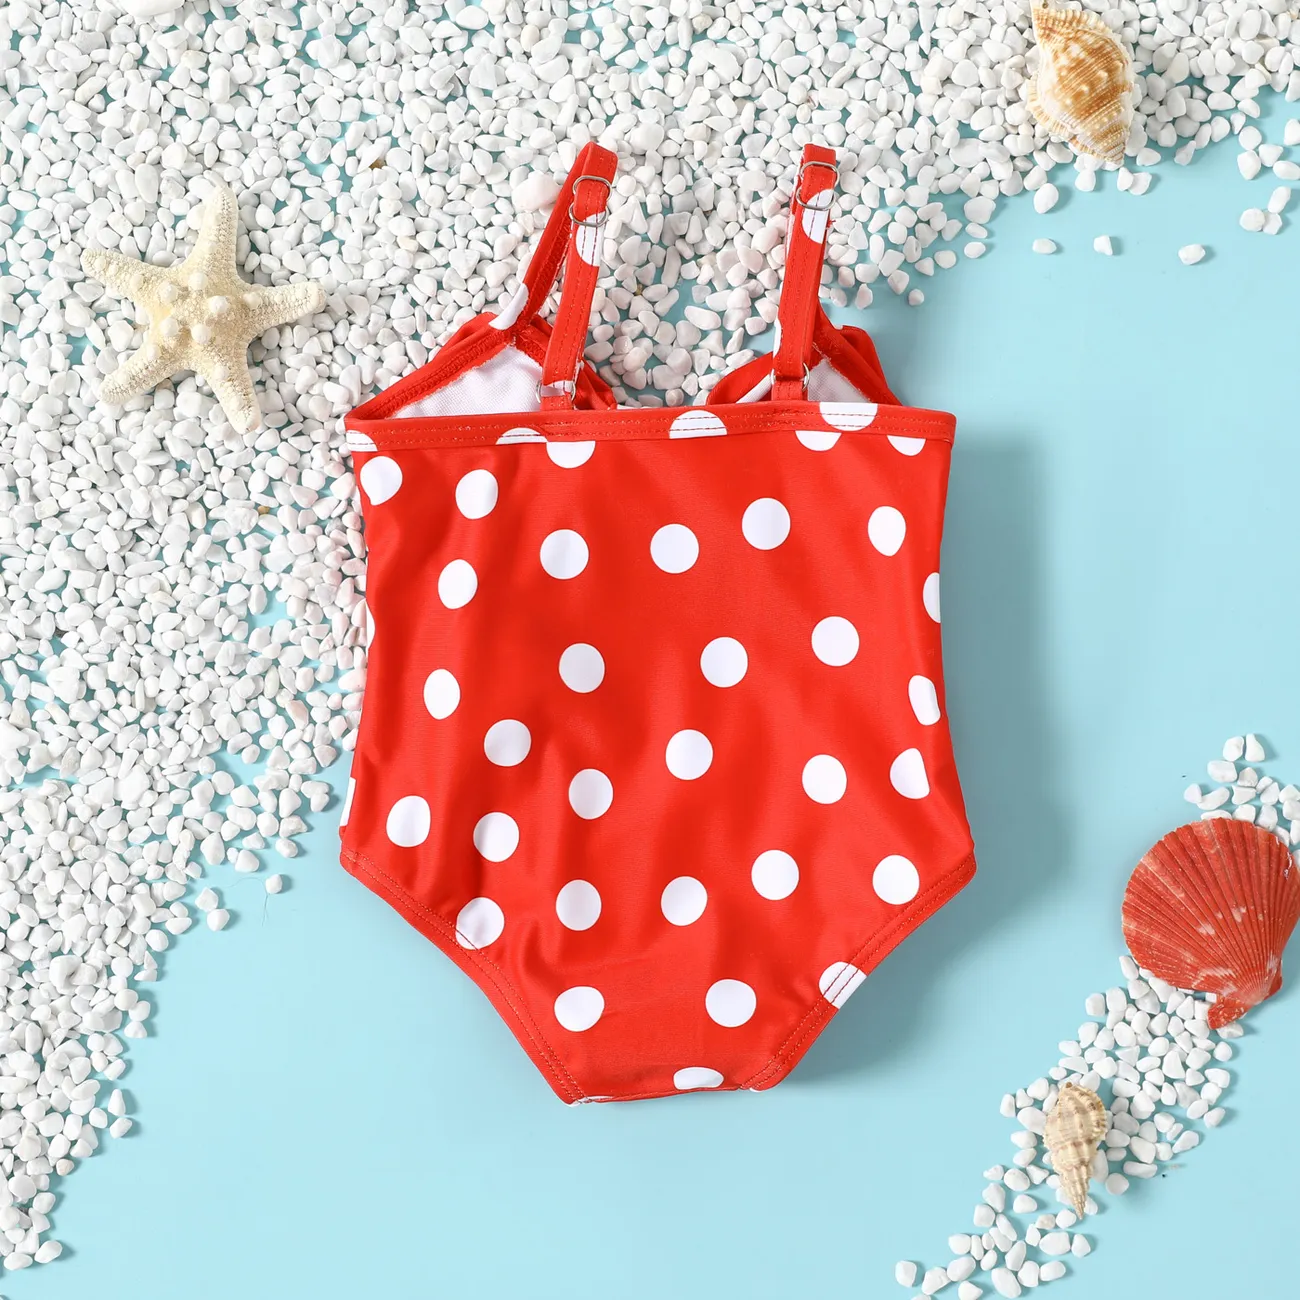 Baby Girl Allover Polka Dot Print Cut Out One-Piece Swimsuit Red big image 1